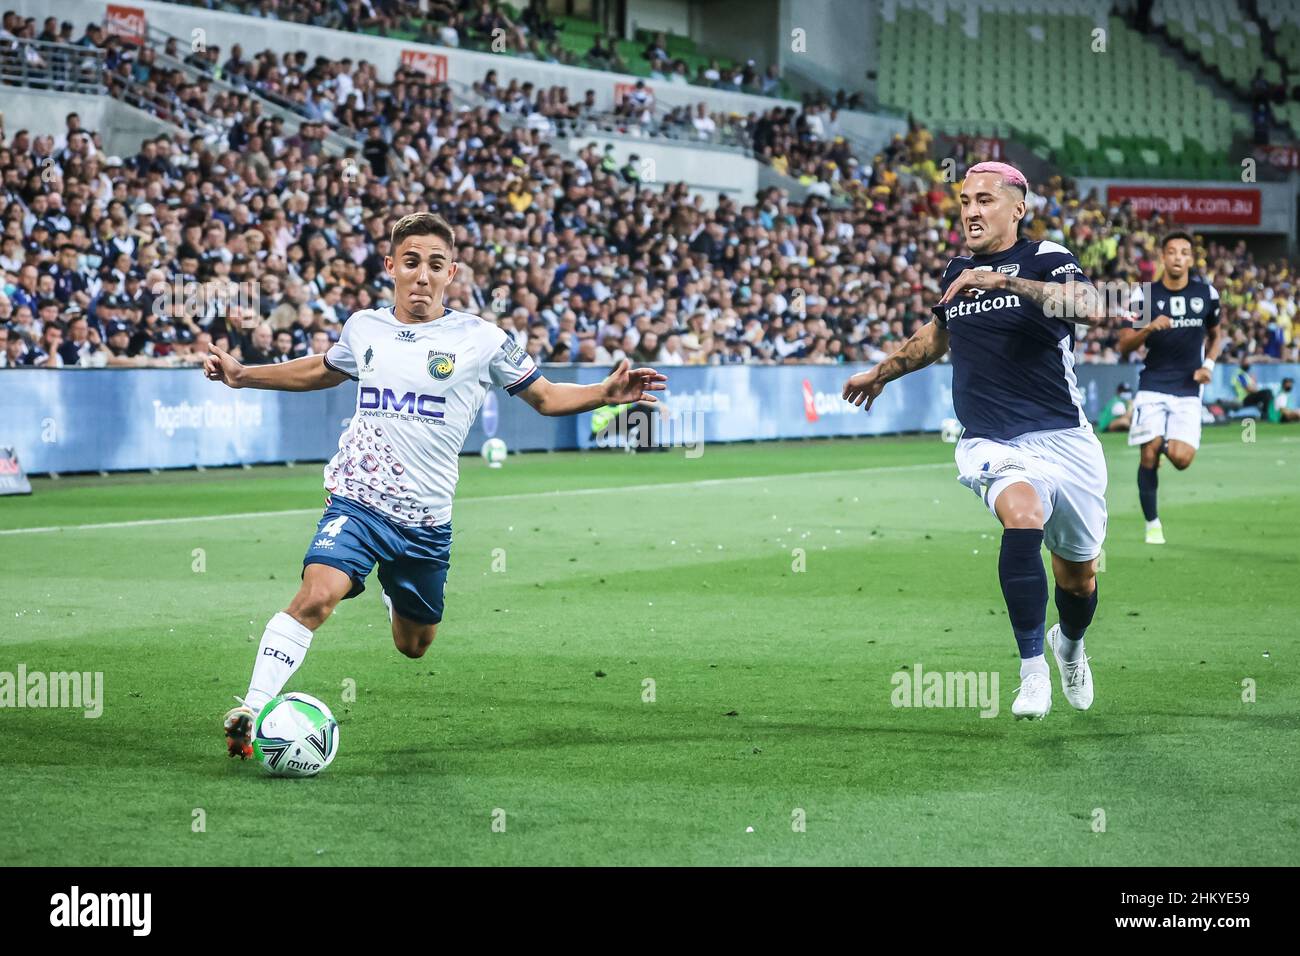 February 5, 2022, Melbourne, Victoria, Australia: MELBOURNE, AUSTRALIA - FEBRUARY 05: Jason Davidson and Joshua Nisbet during the 2021 FFA Cup Final match between Melbourne Victory and Central Coast Mariners at AAMI Park on February 05, 2022 in Melbourne, Australia (Credit Image: © Chris Putnam/ZUMA Press Wire) Stock Photo